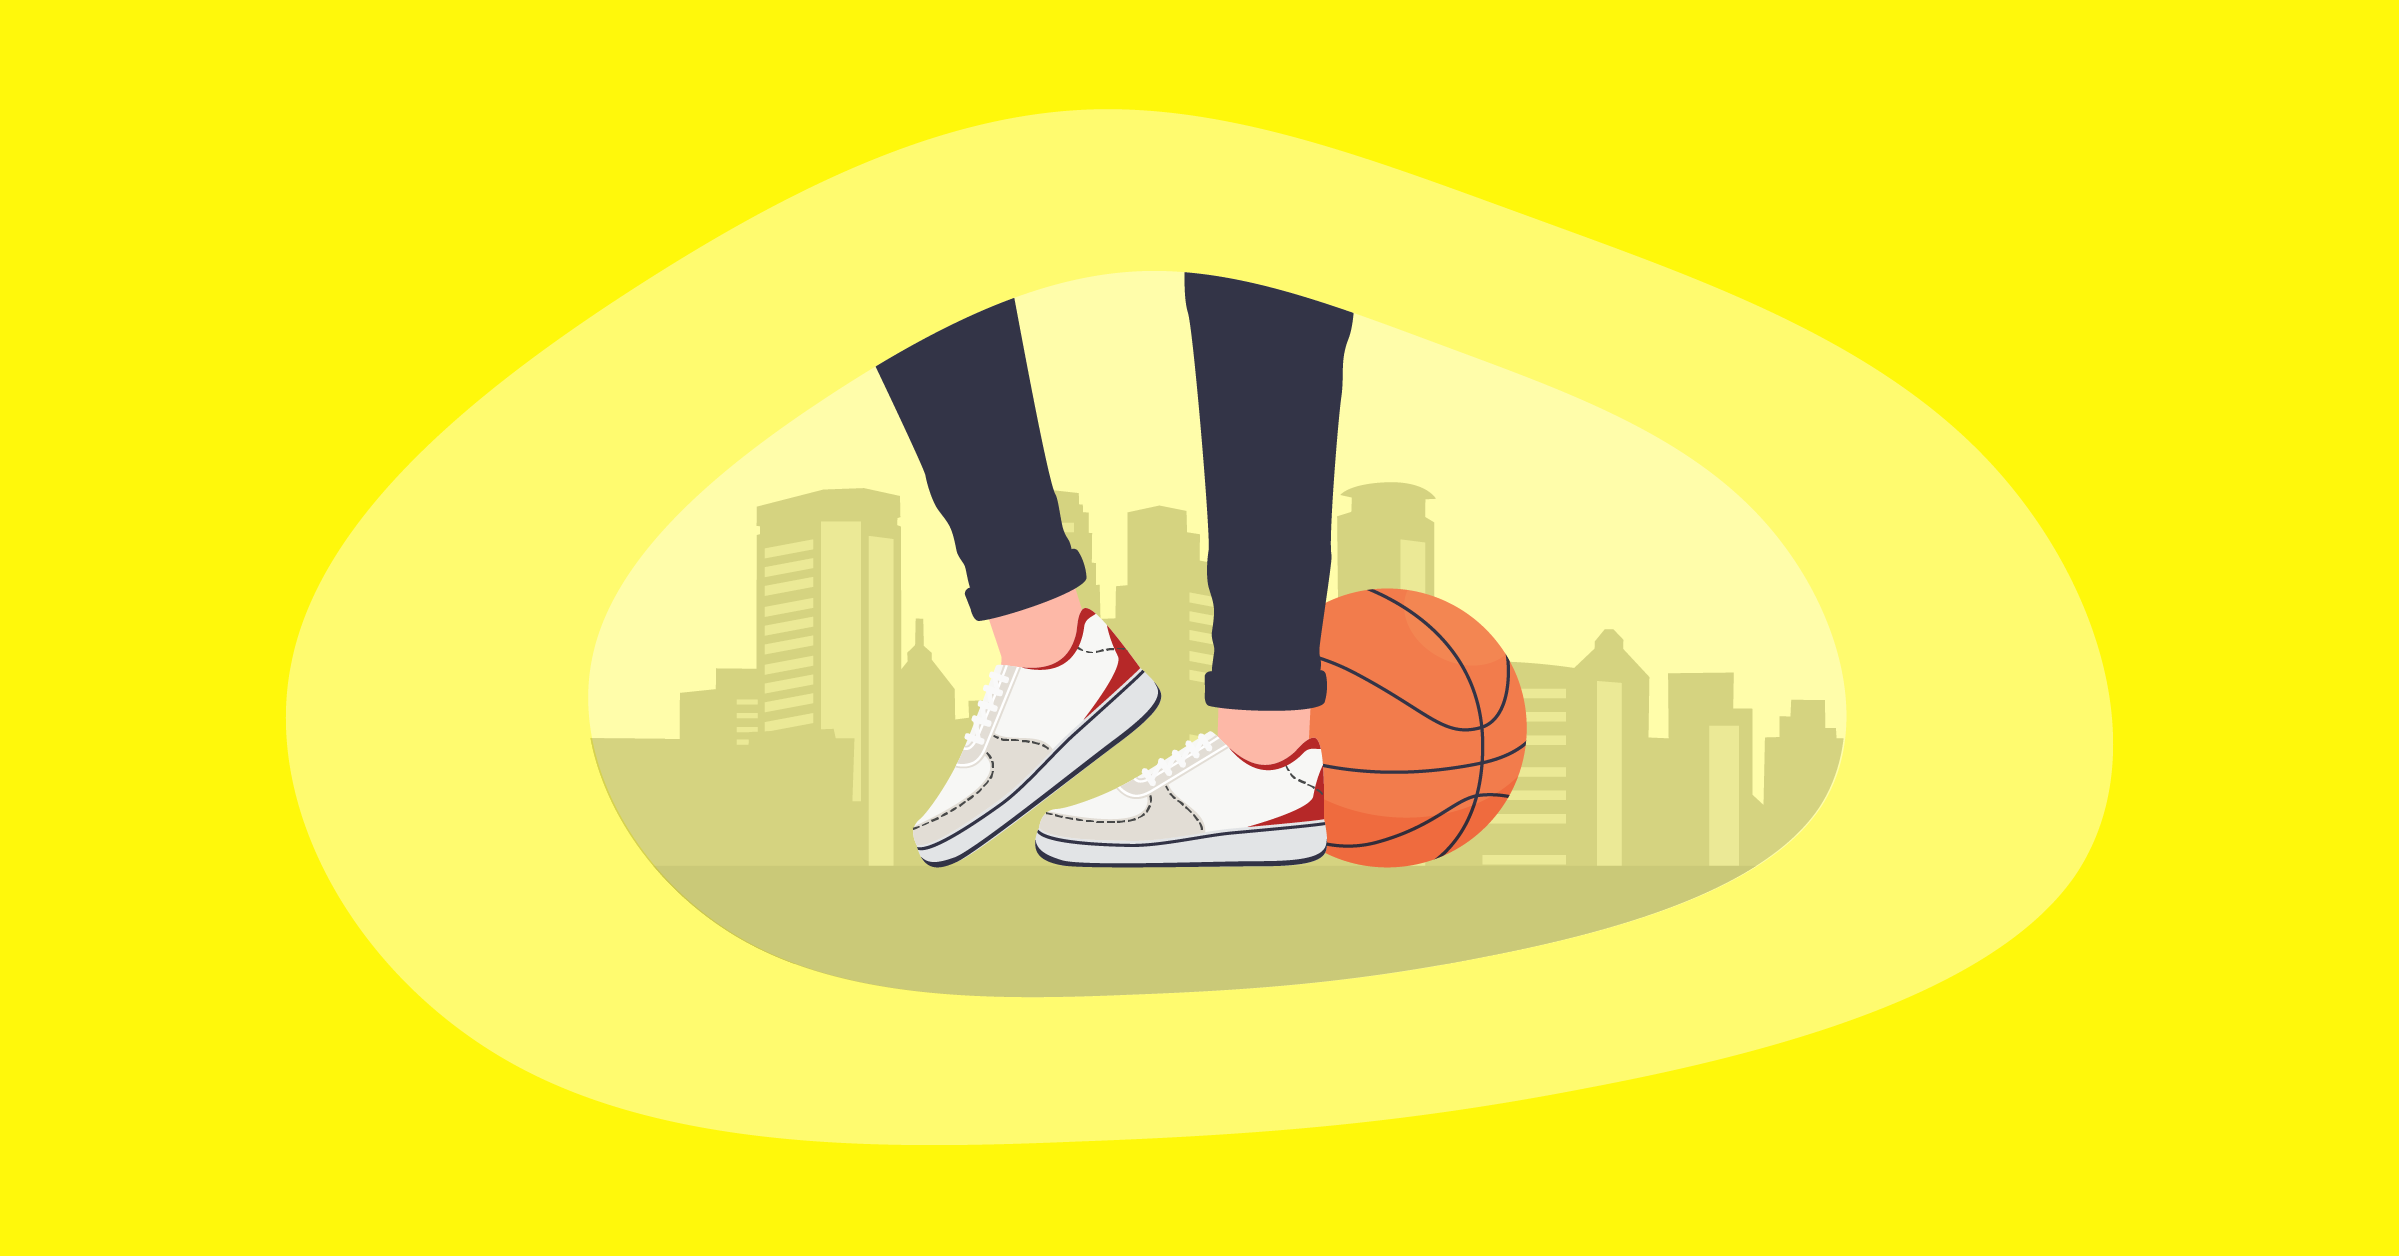 Illustration of a basketball behind a youth's feet